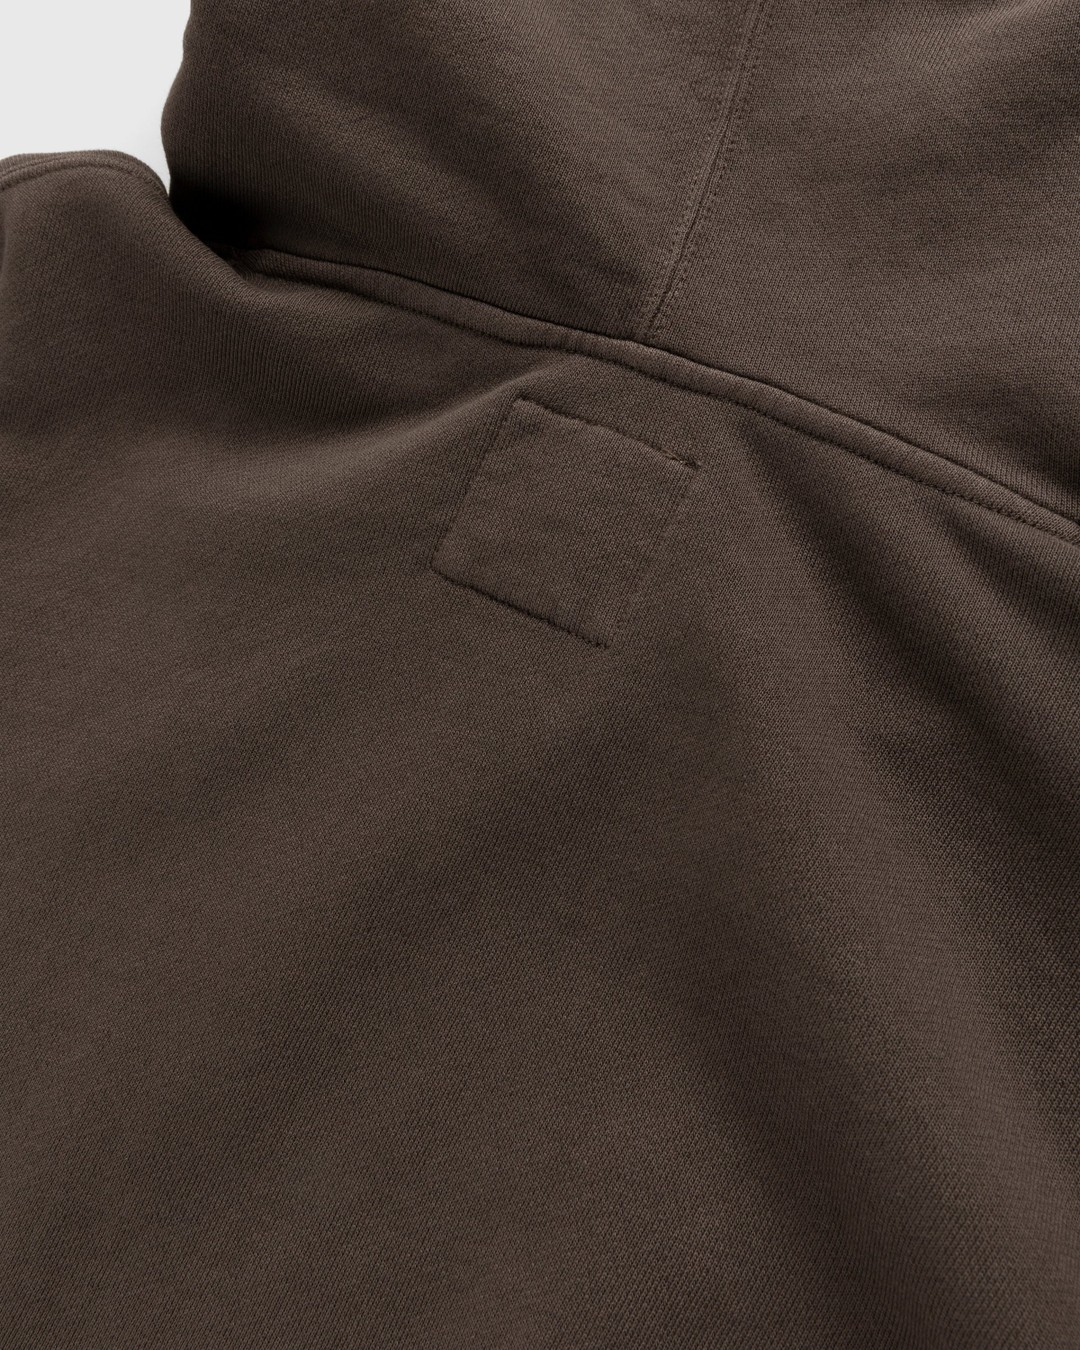 Gramicci – One Point Hooded Sweatshirt Brown Pigment - Sweats - Brown - Image 5